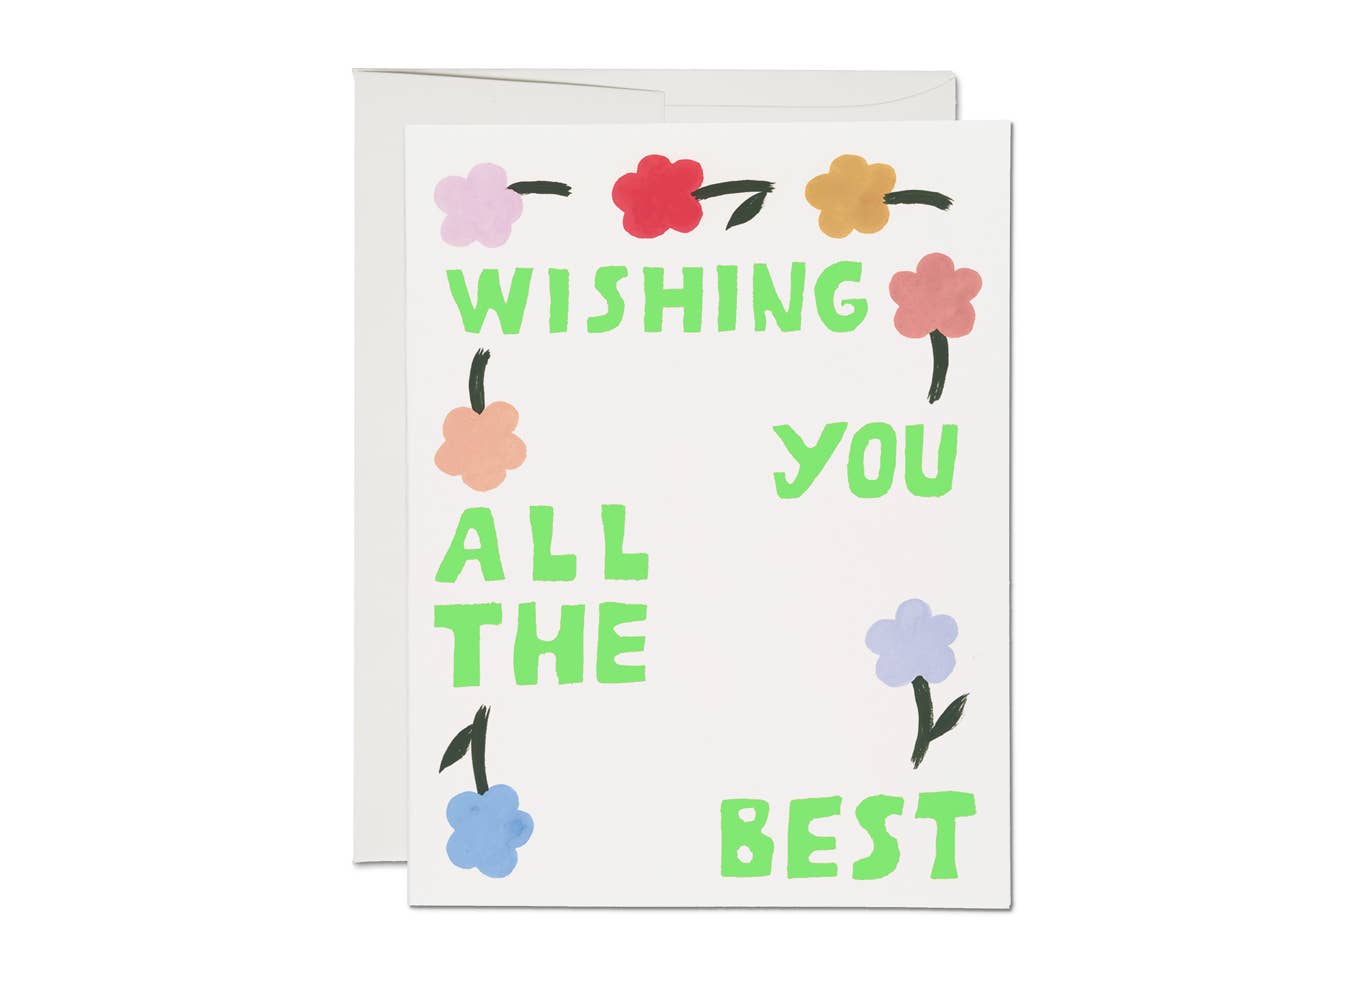 Flipping Flowers encouragement greeting card